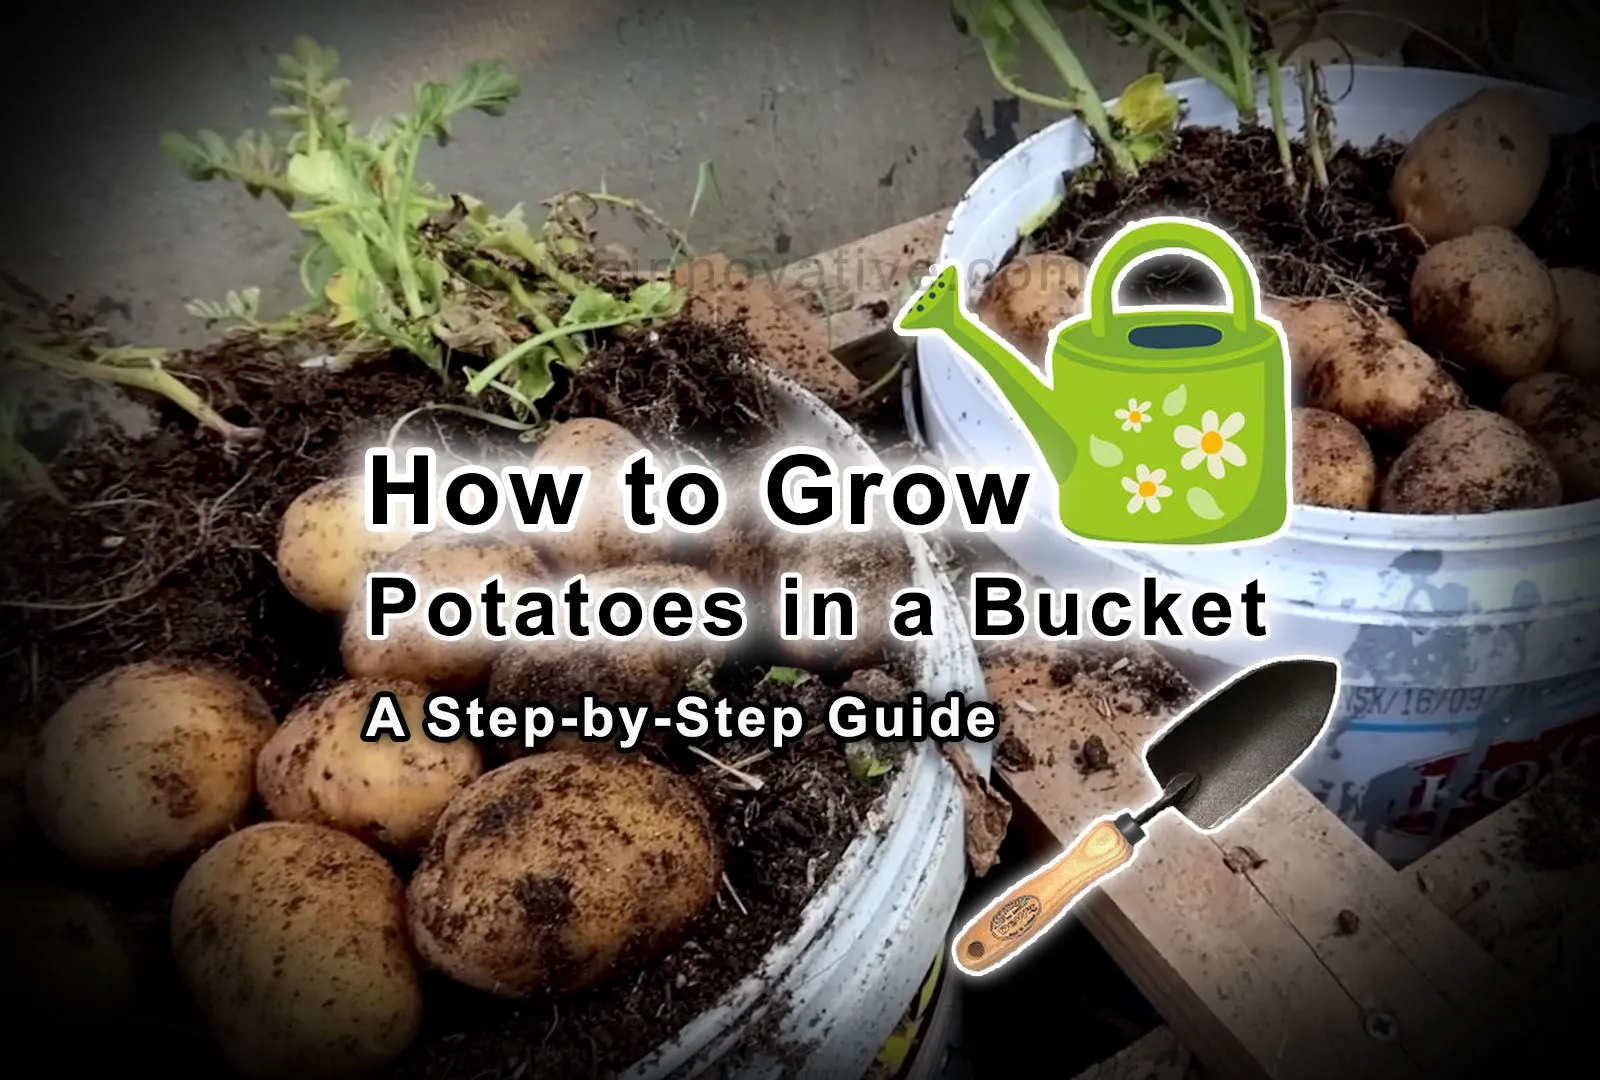 How to Grow Potatoes in a Bucket [5-Gallon] A Step-by-Step Guide